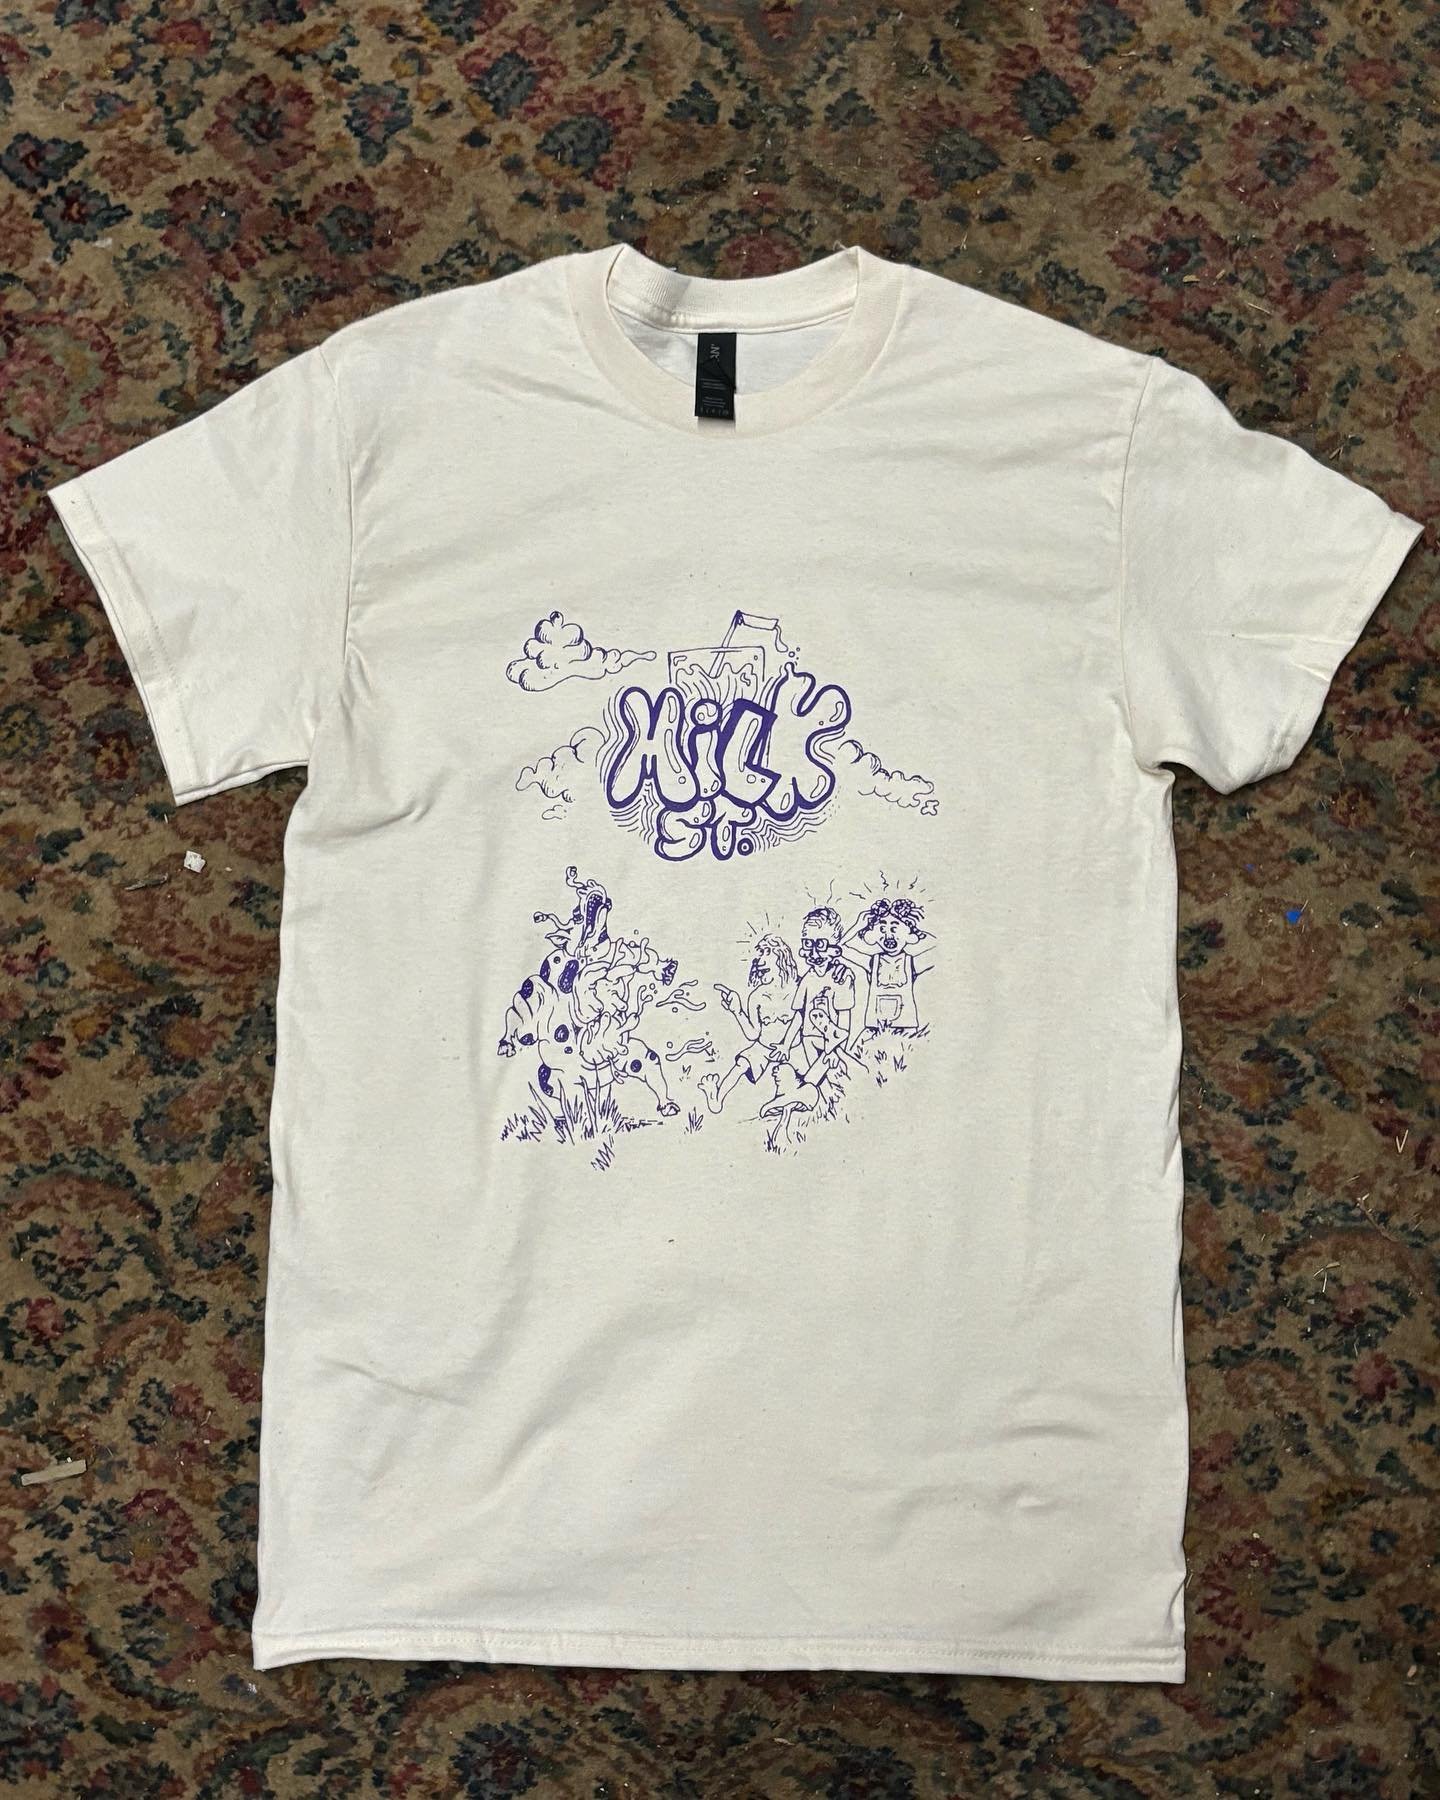 Get your vitamin D in with these purple on natural tees for @milkstreetband 

INK / Tiger Purple ELT- S @onestroke_inks 
On a classic @gildanwholesale unisex

hit us up for your next project 

Togetherpressma.com